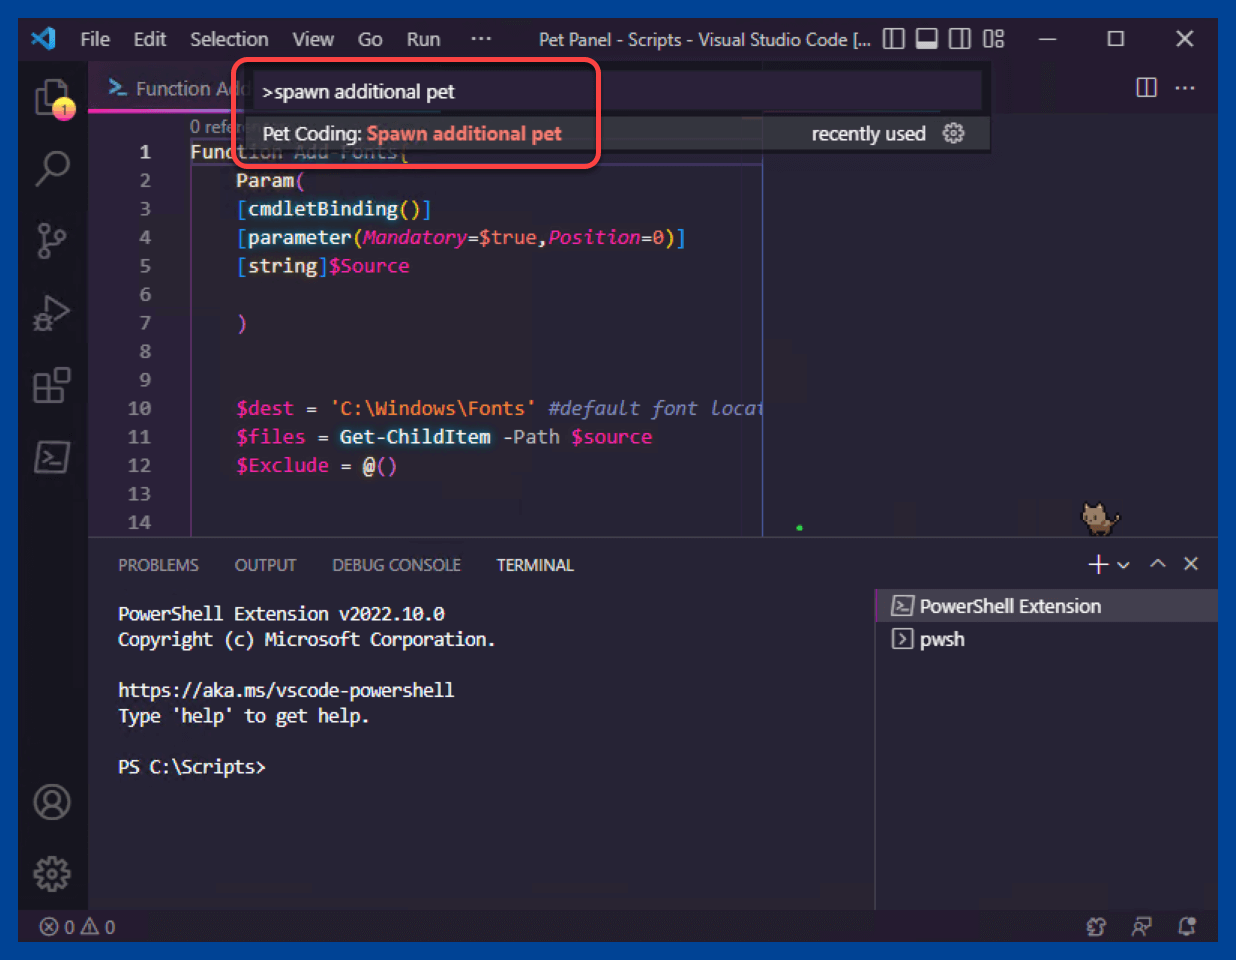 Spawning additional pets in VS Code